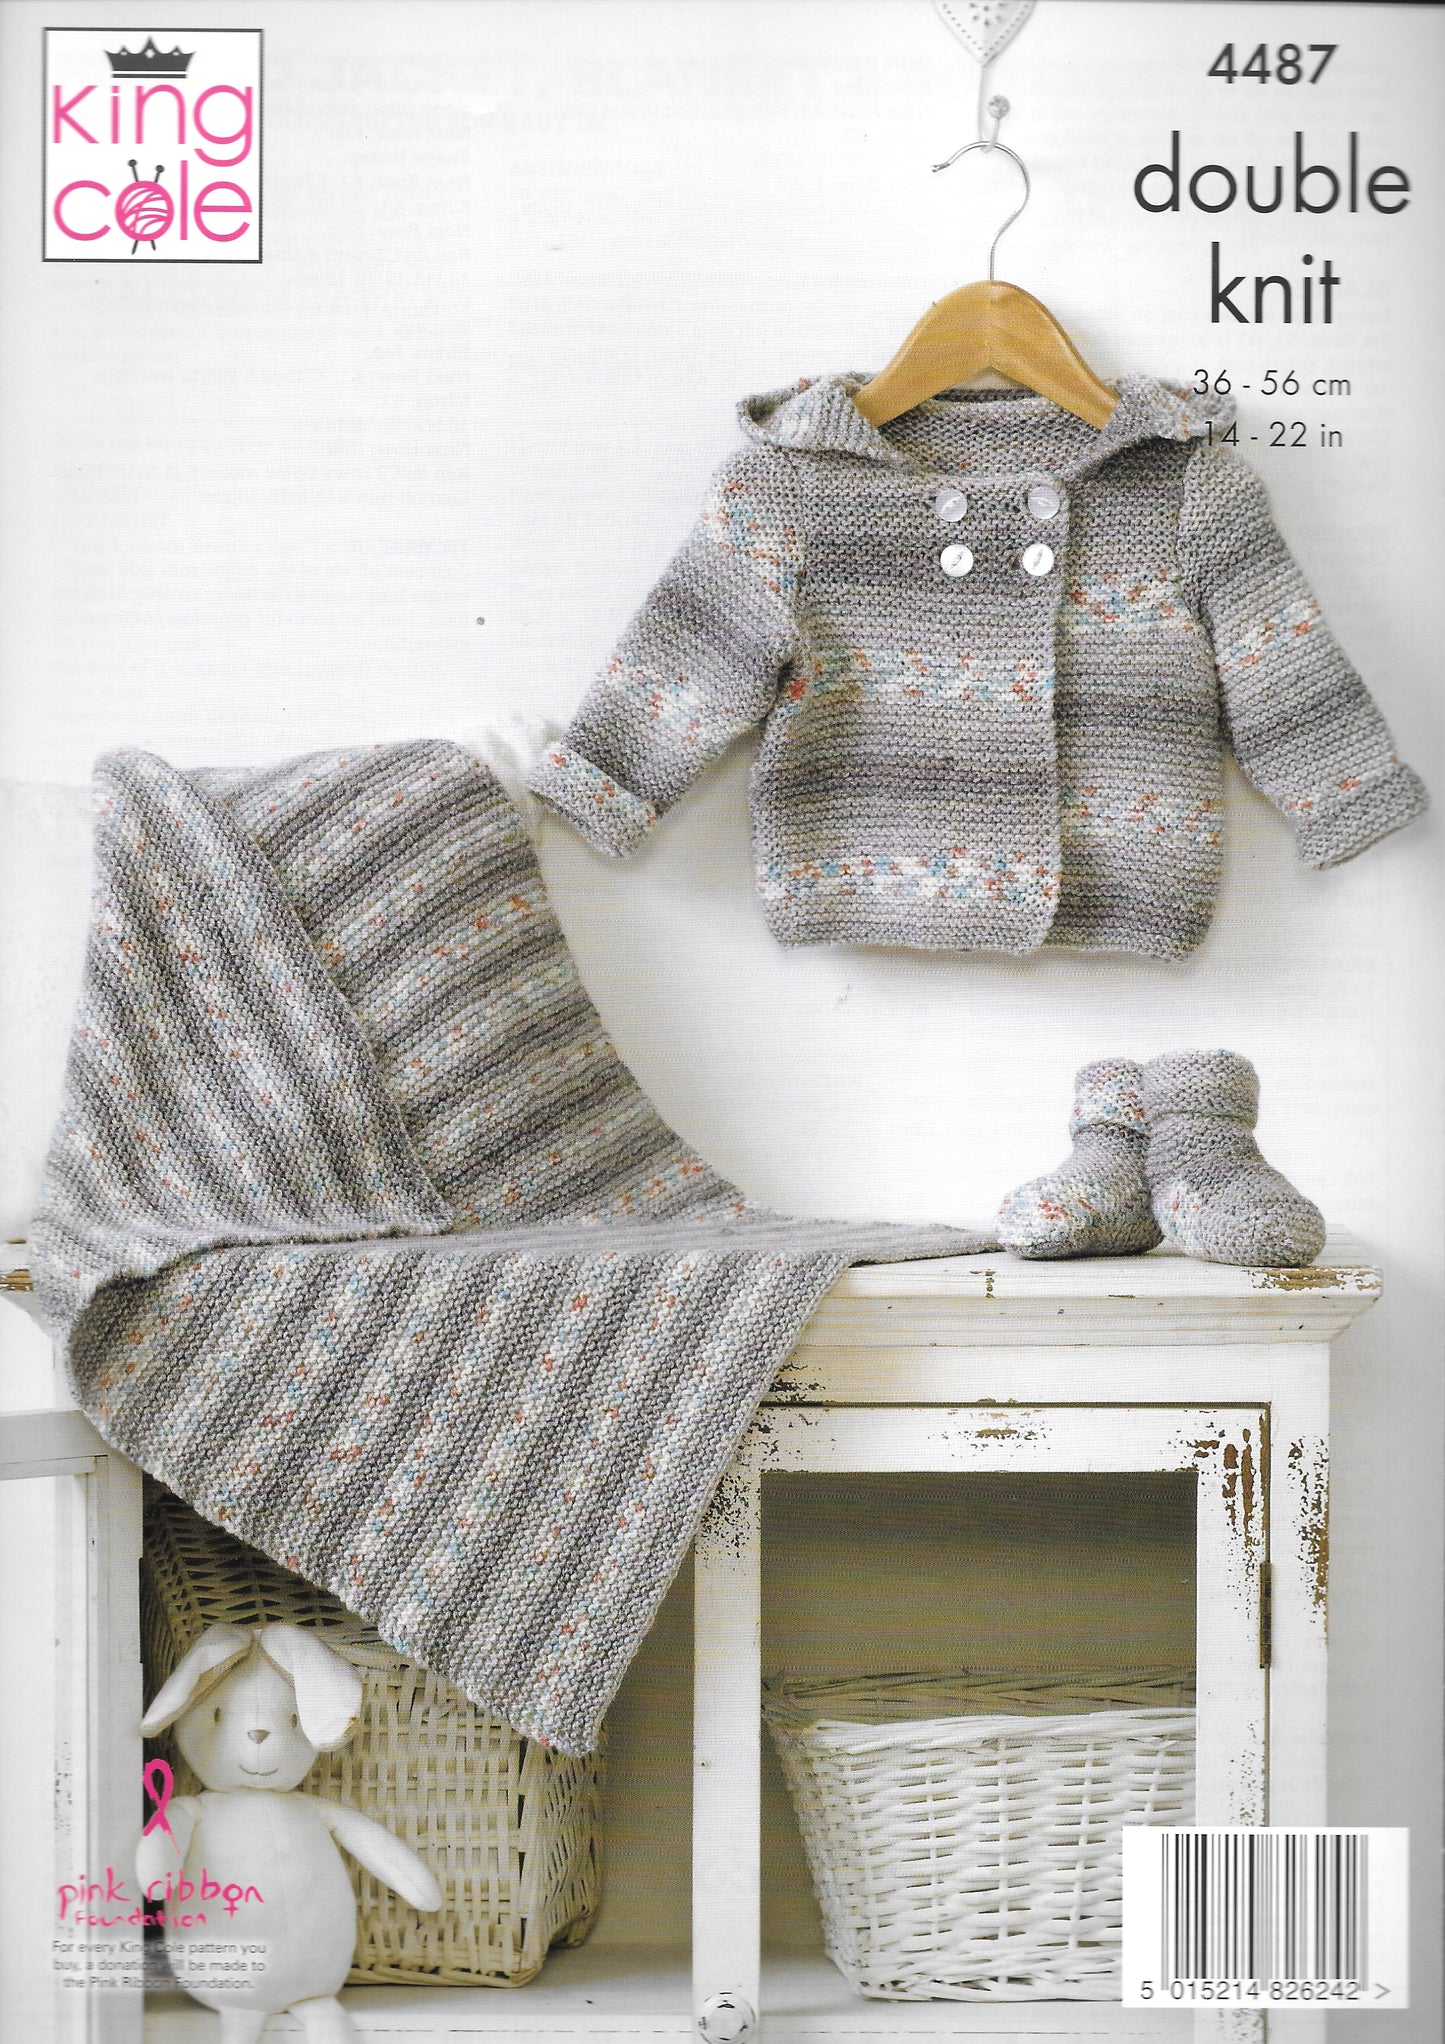 4487 King Cole Double Knit Hooded Jacket, Bootees and Blanket knitting pattern